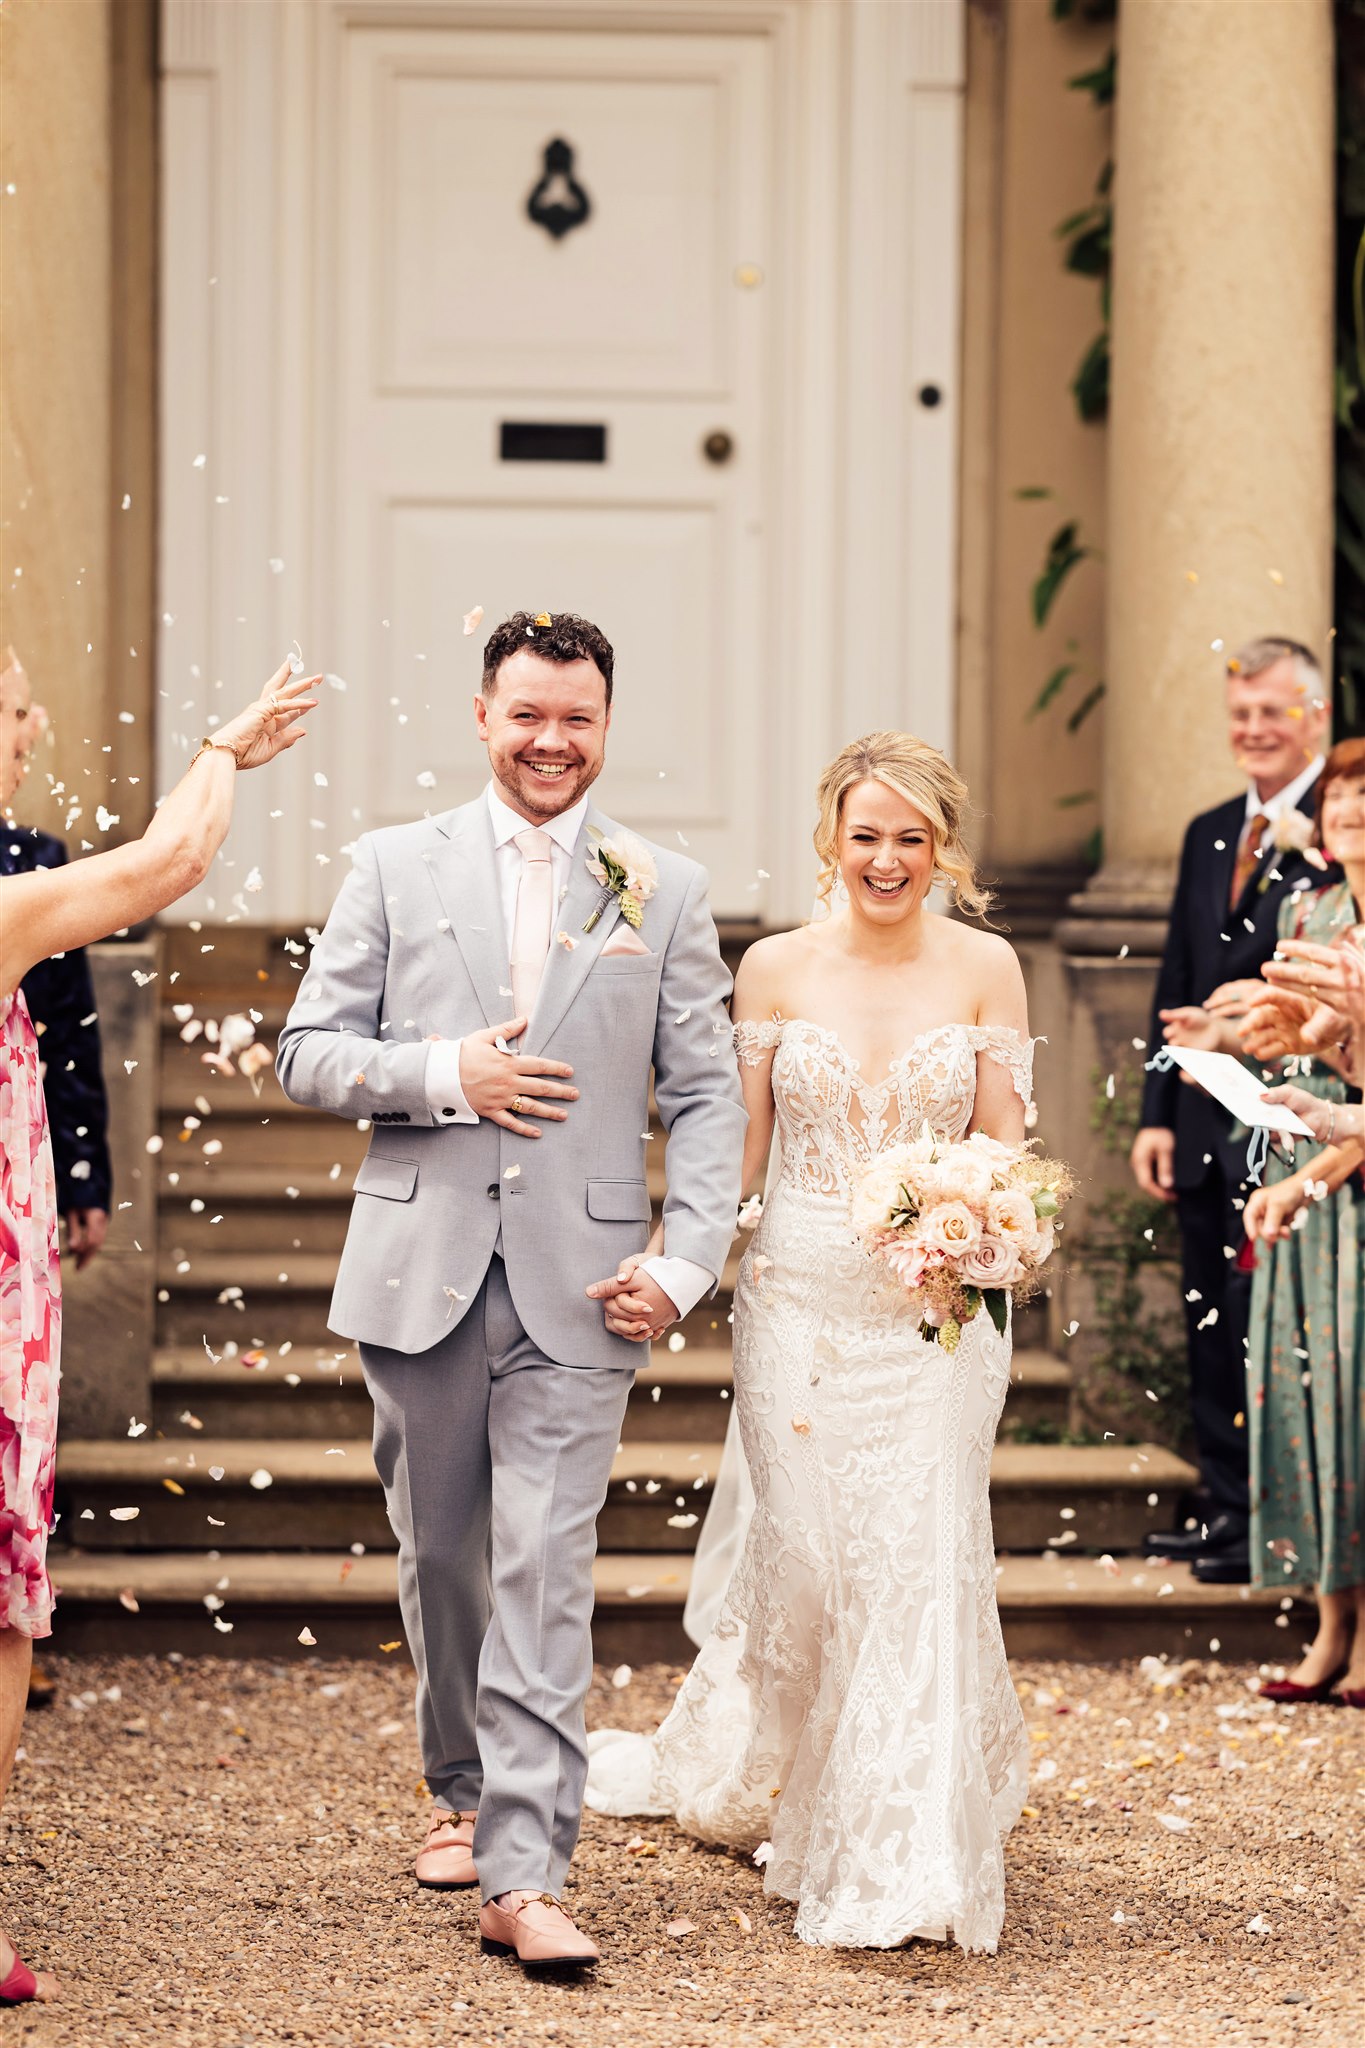 A bride wearing an off the shoulder white lace dress stands next to a groom wearing a grey suit and pink tie with the background of a red brick Georgian mansion and their guests throwing confetti over them